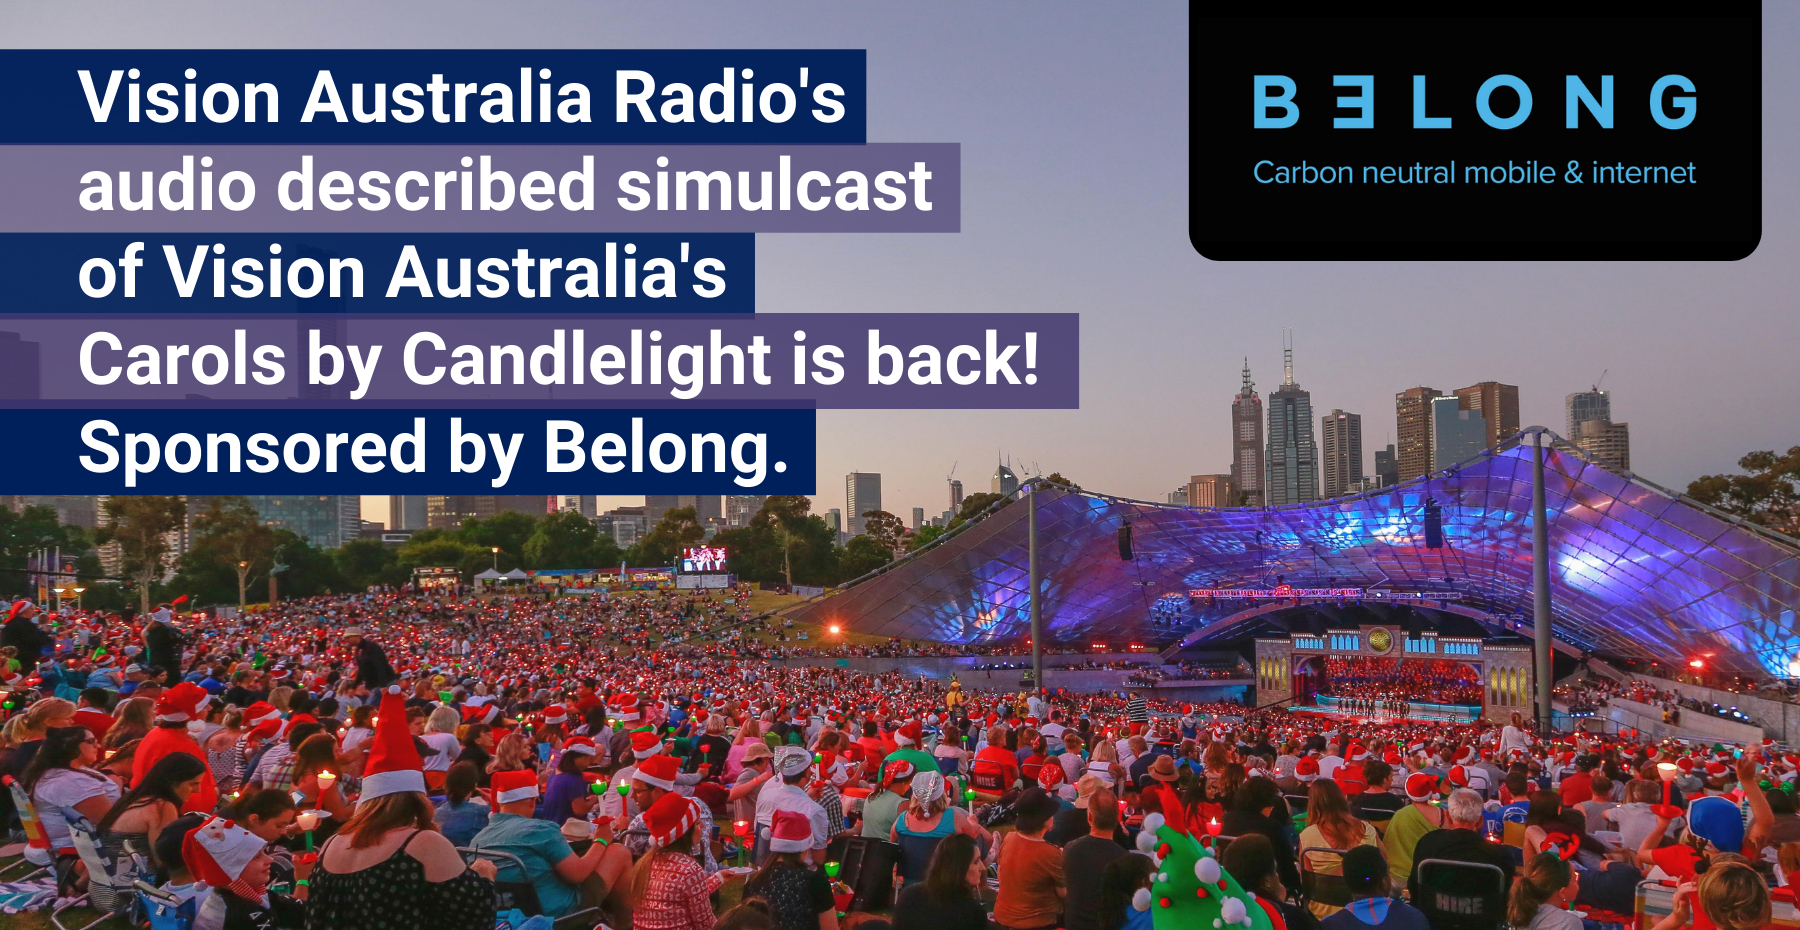 Sidney Myer Music bowl lit with lights and full carols audience. Text reads: Vision Australia Radio's audio described simulcast of Vision Australia's Carols by Candlelight is back! Sponsored by Belong